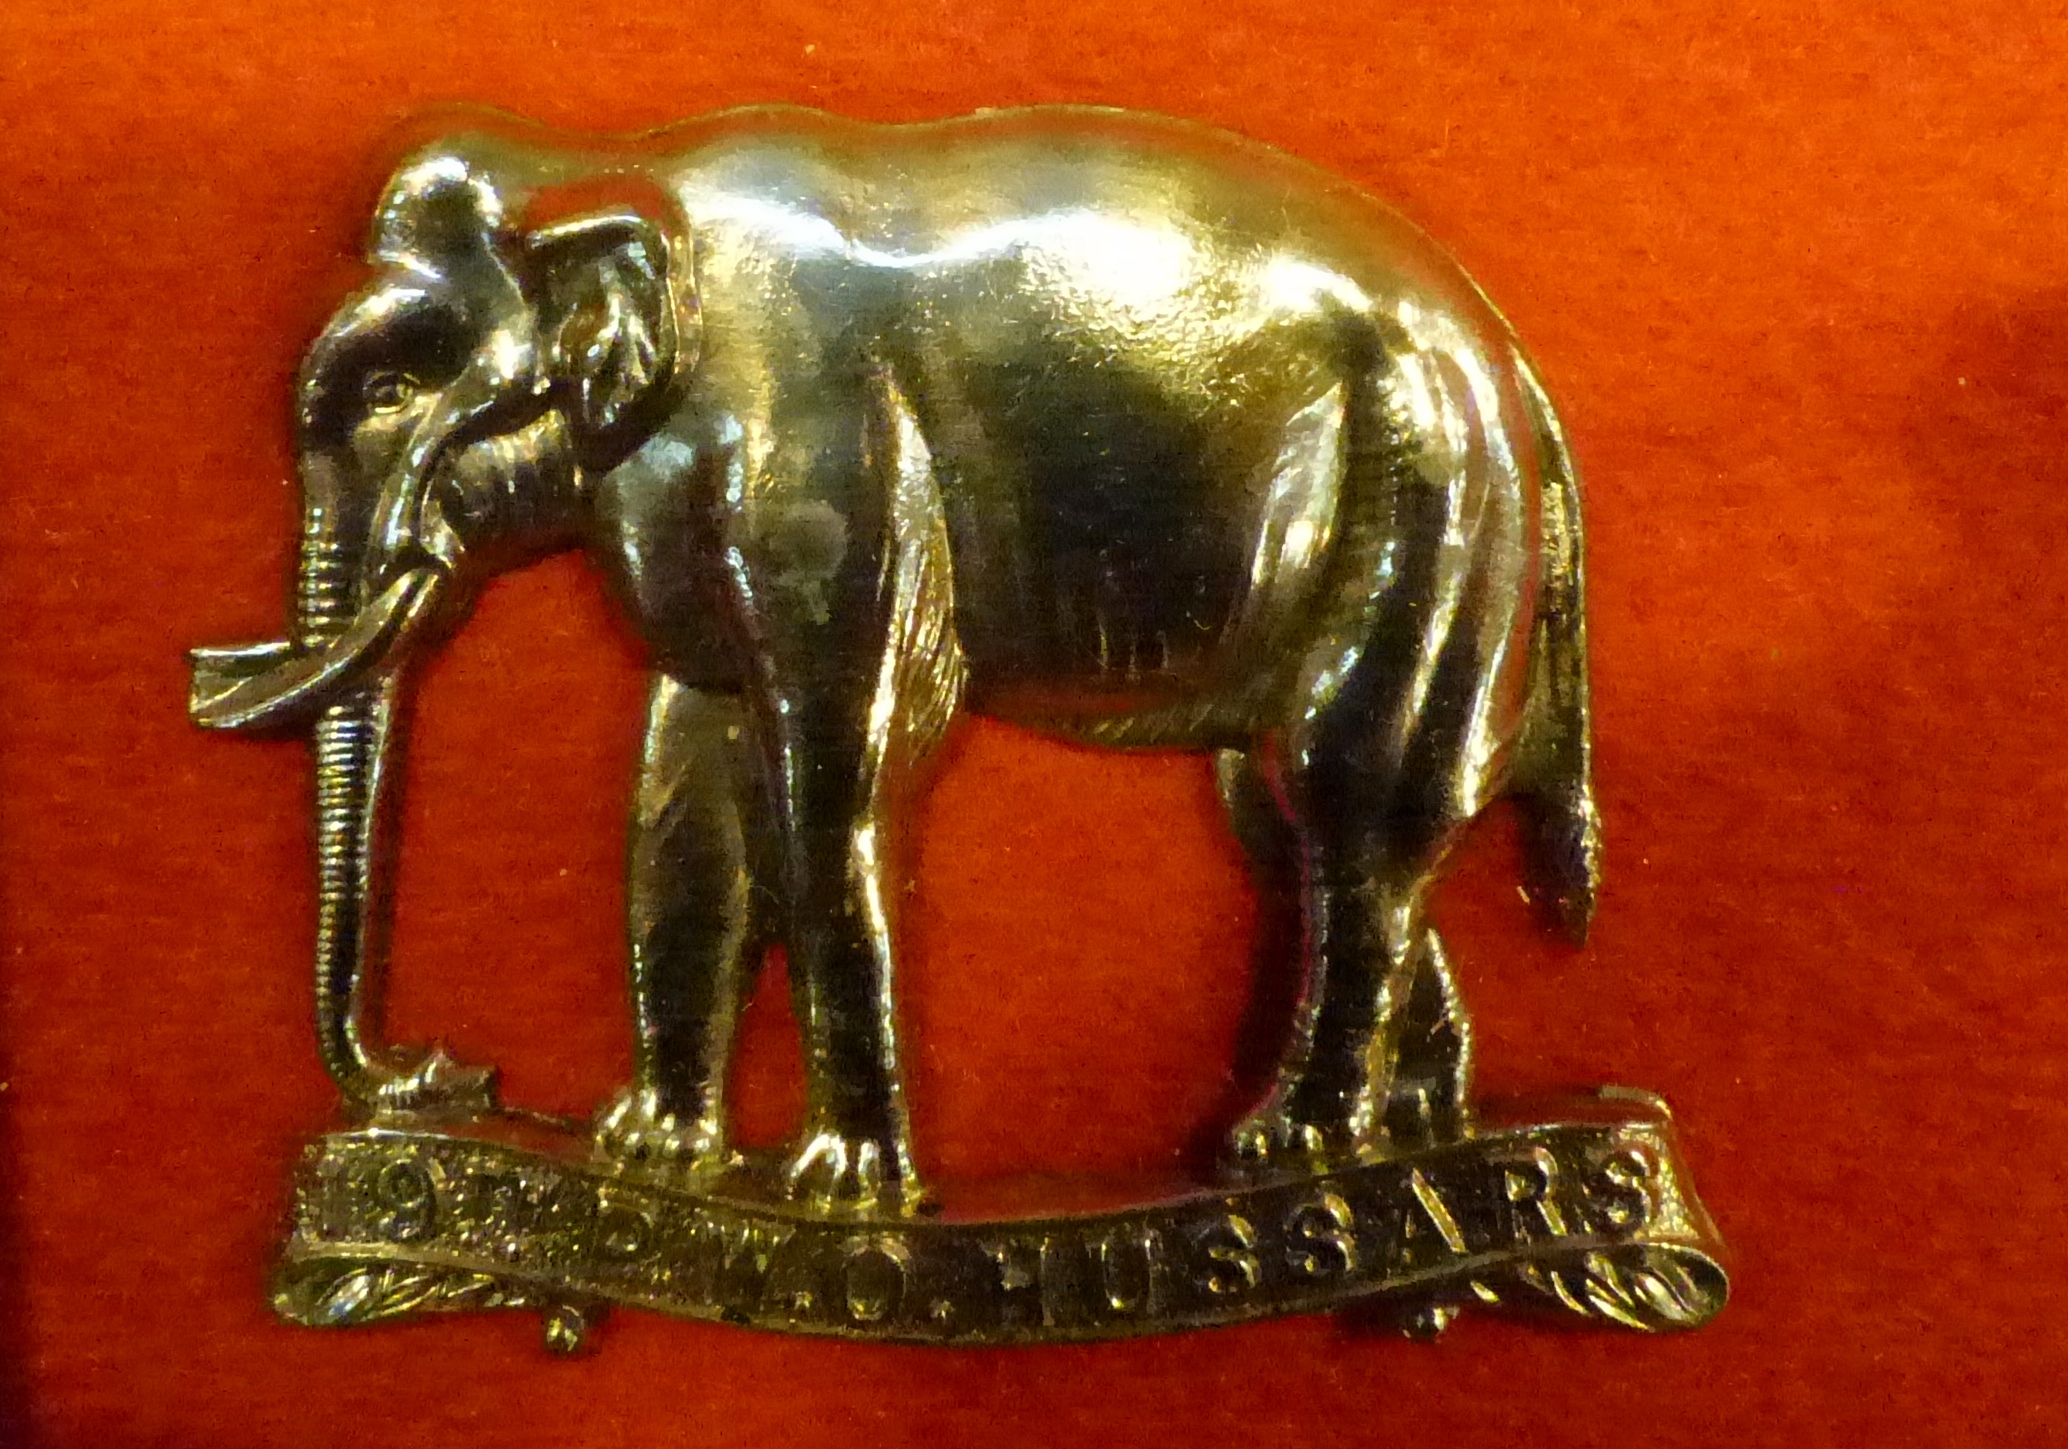 23 military cap badges including 14th Kings Hussars, - Image 2 of 3